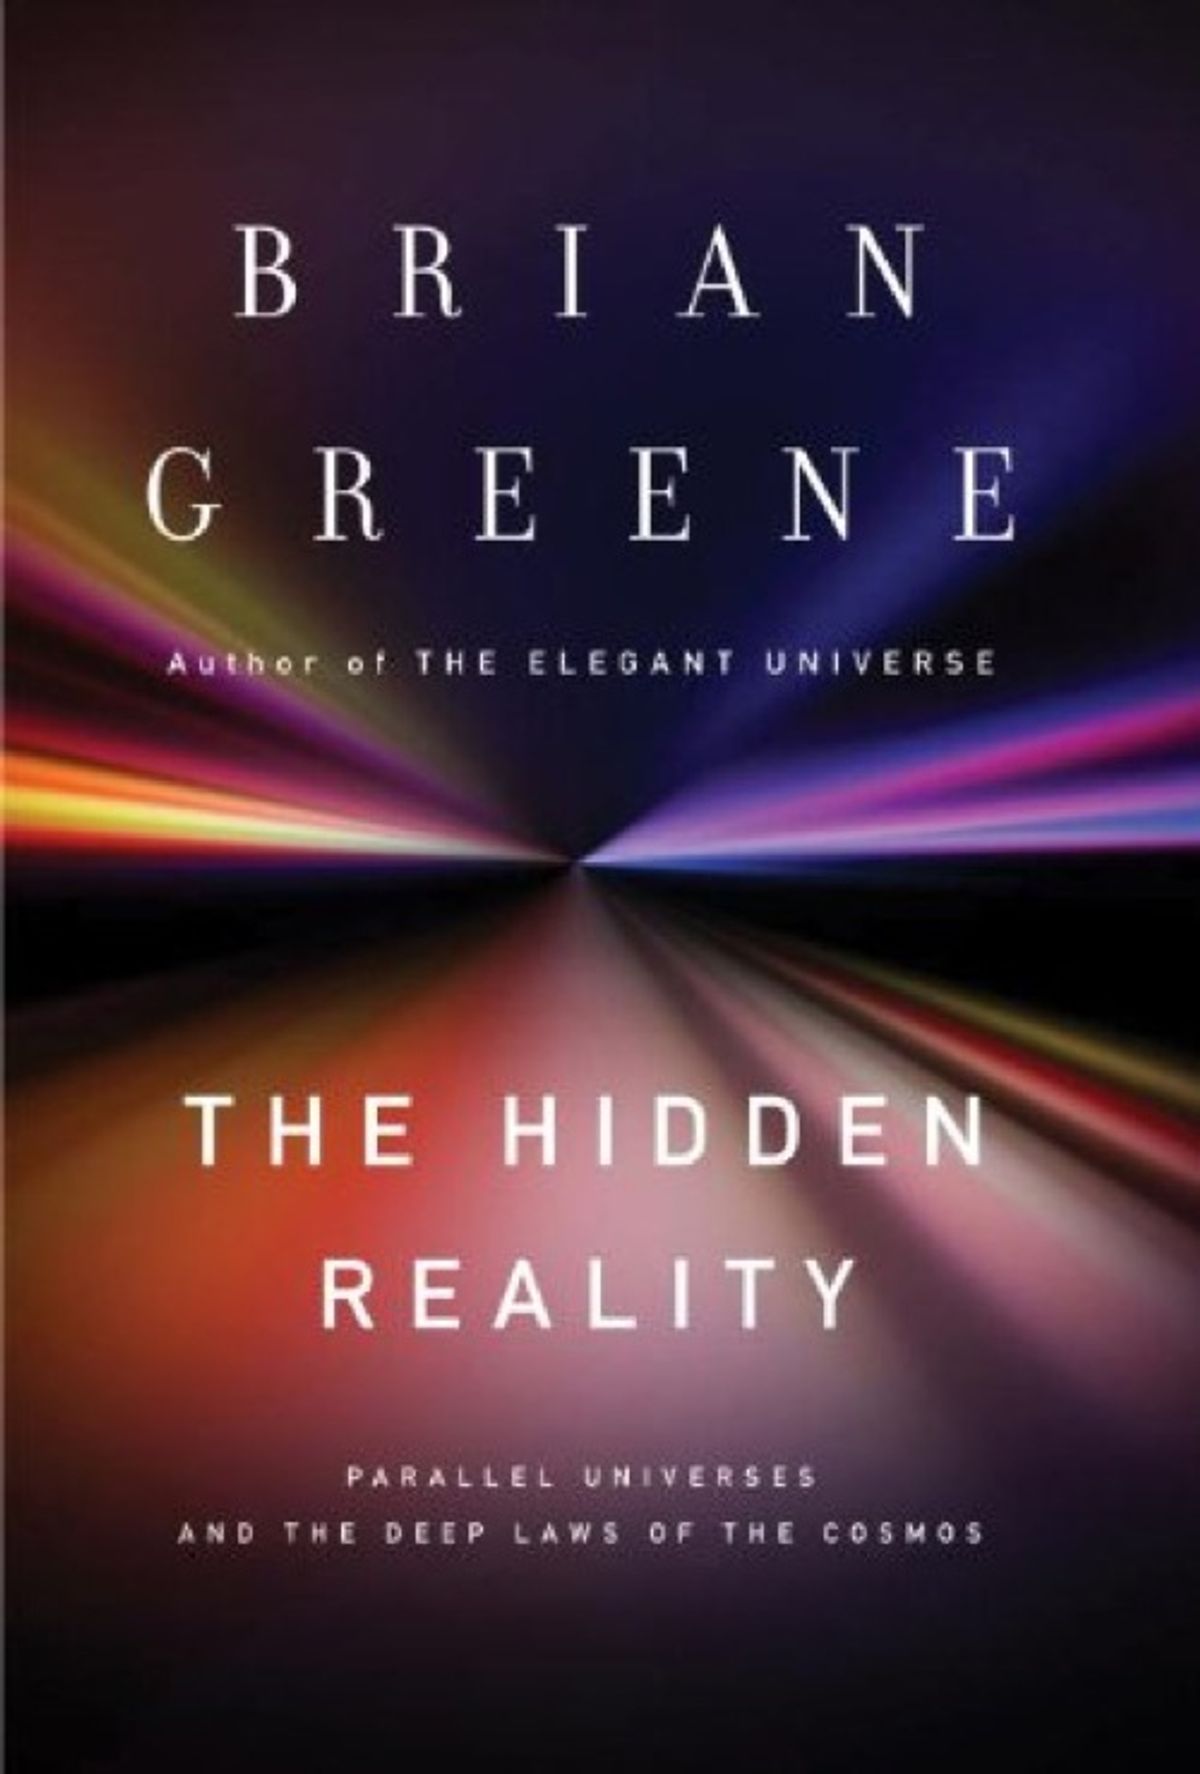 "The Hidden Reality" by Brian Greene